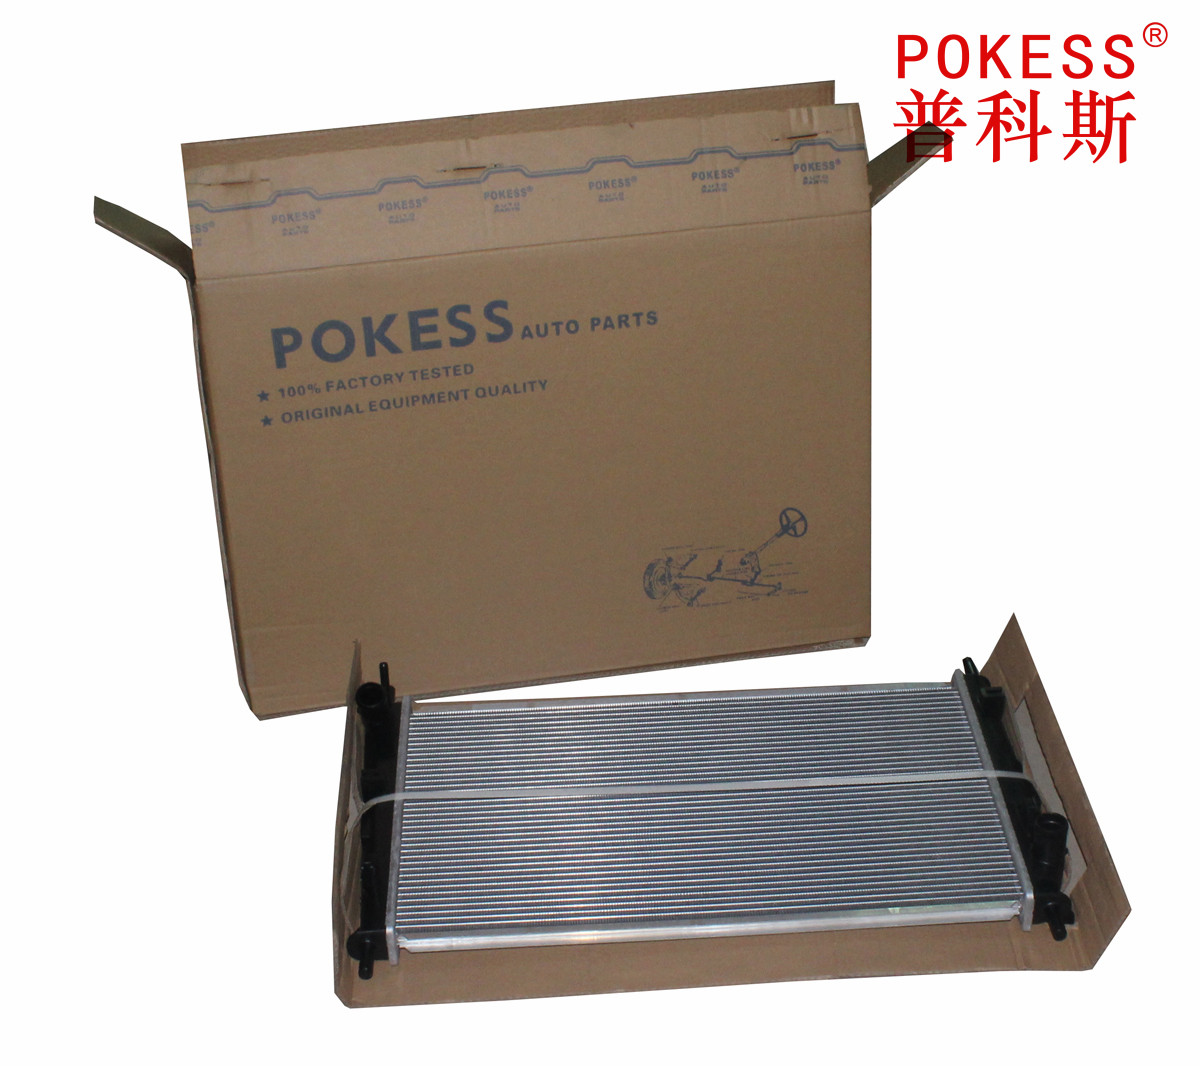 Our excellent product: POKESS(图2)